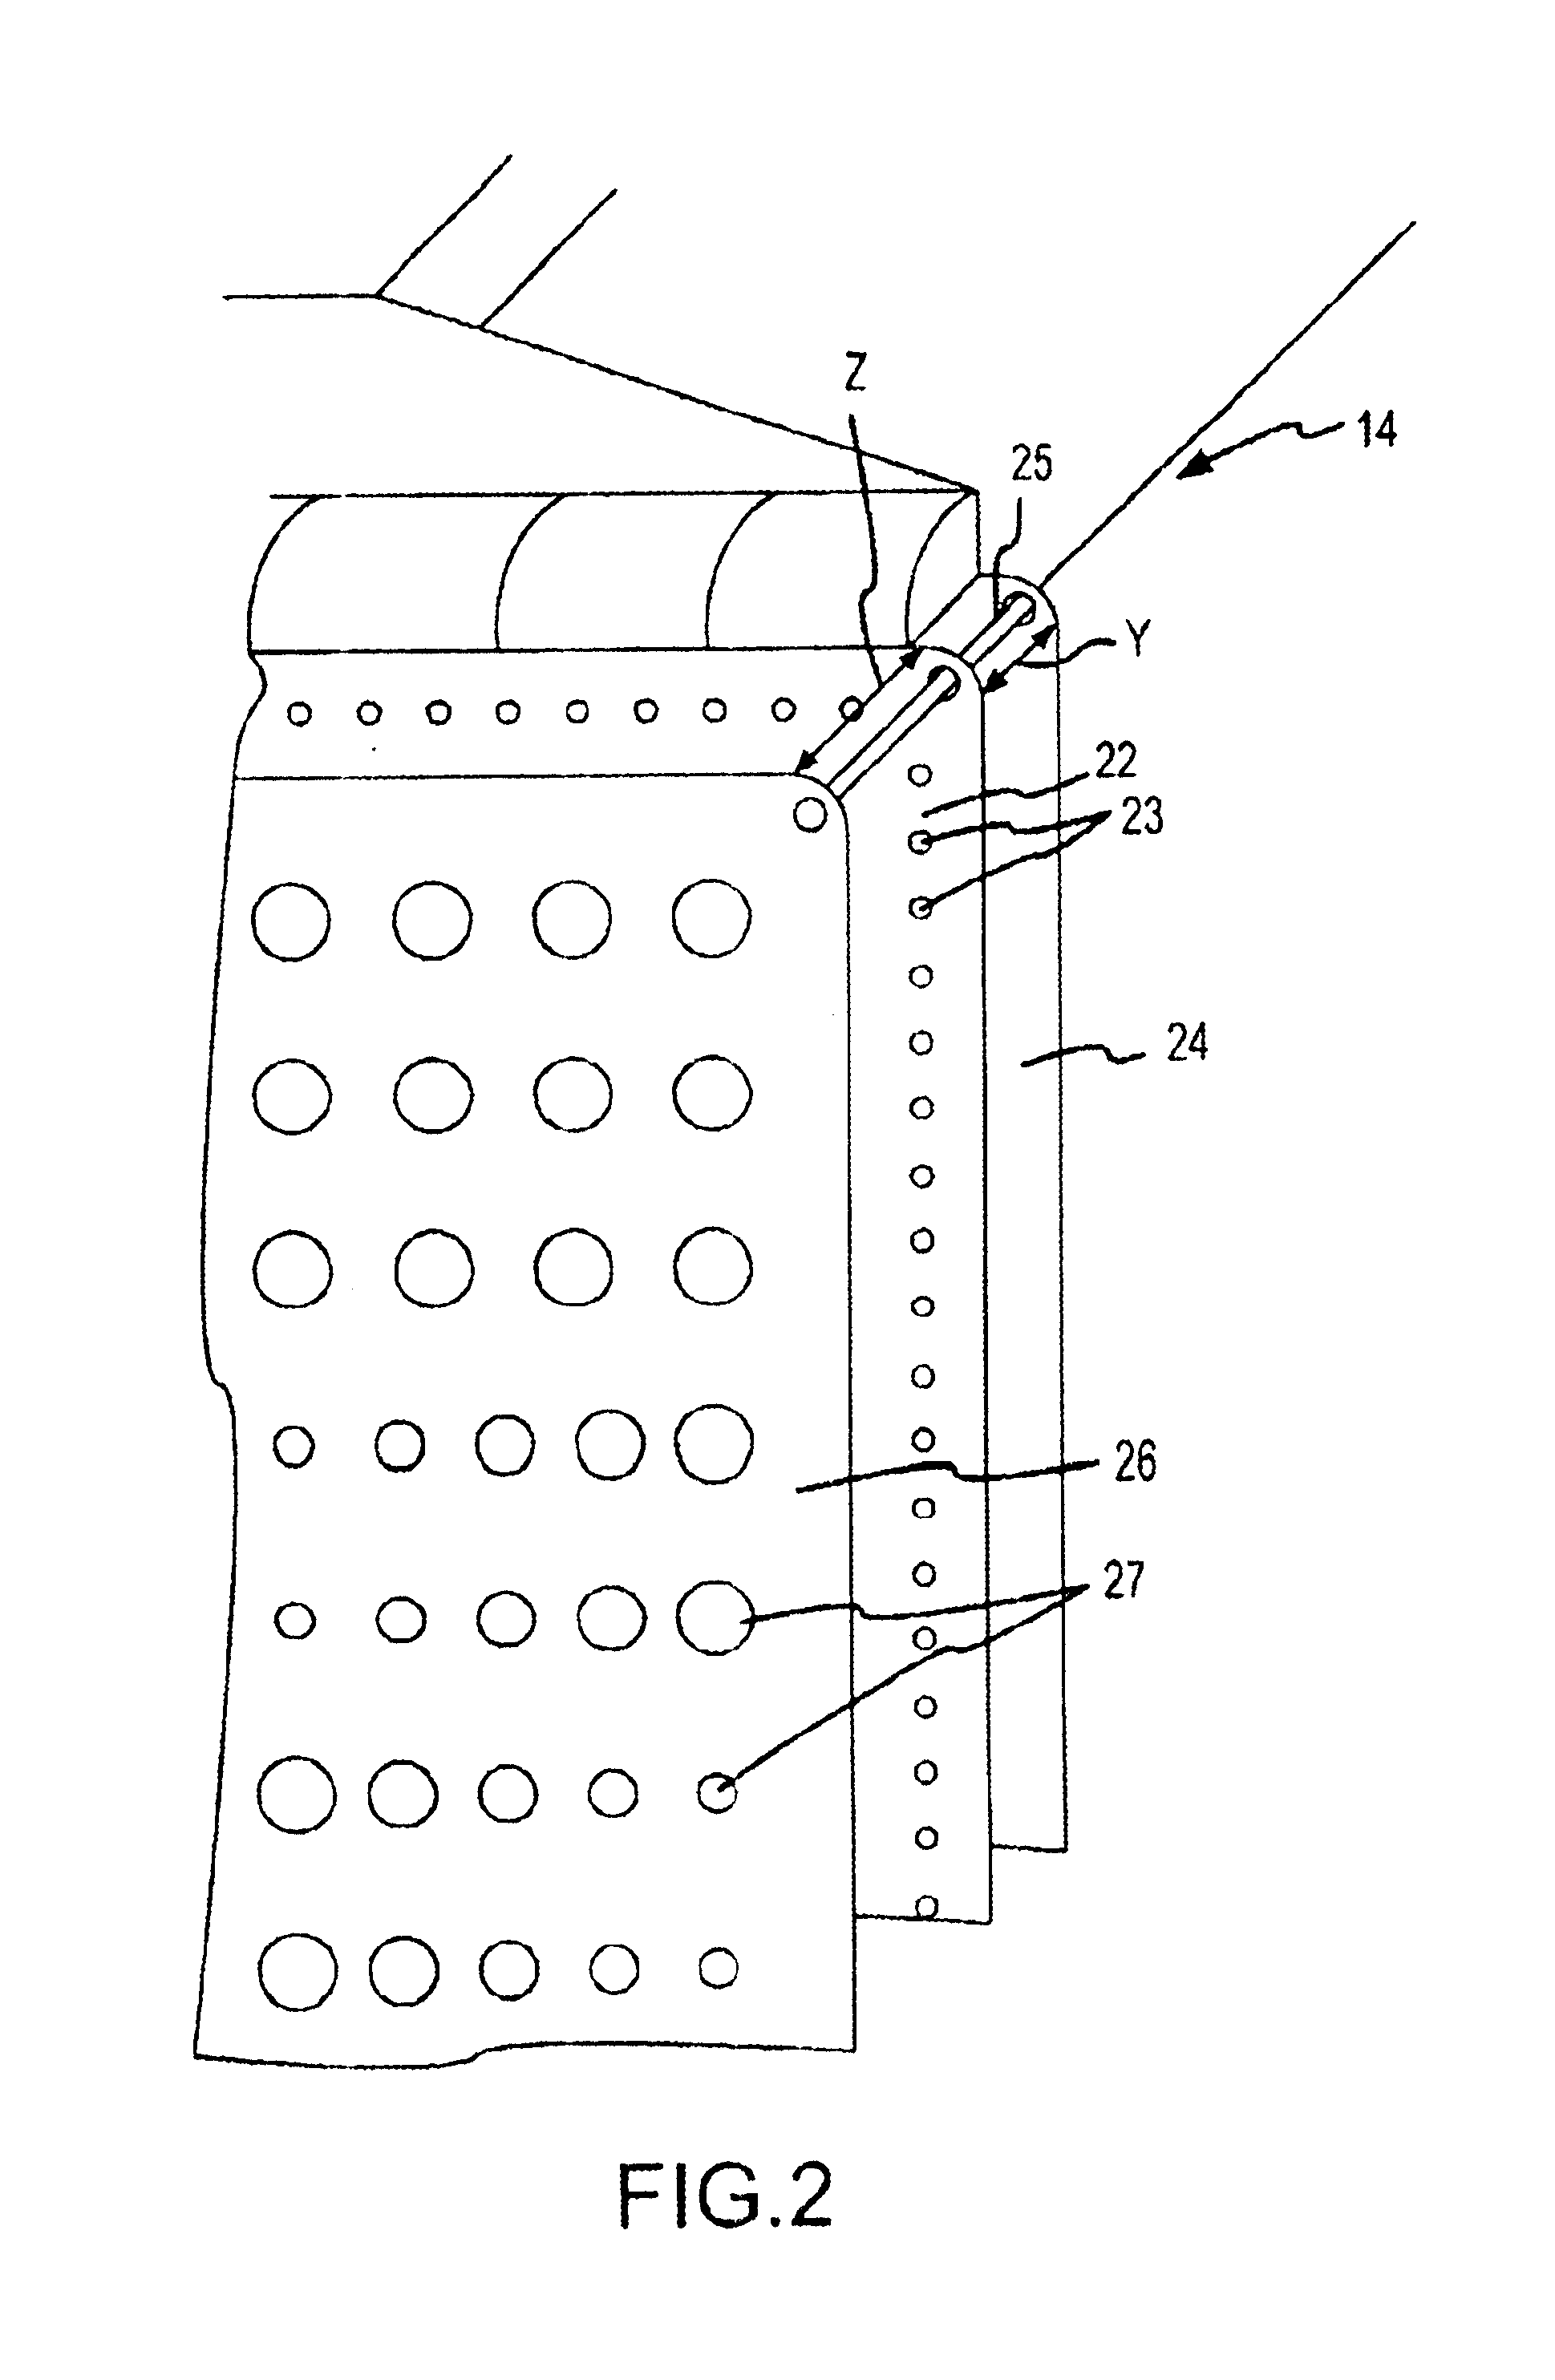 Method and apparatus for reducing drag of blunt shaped vehicles